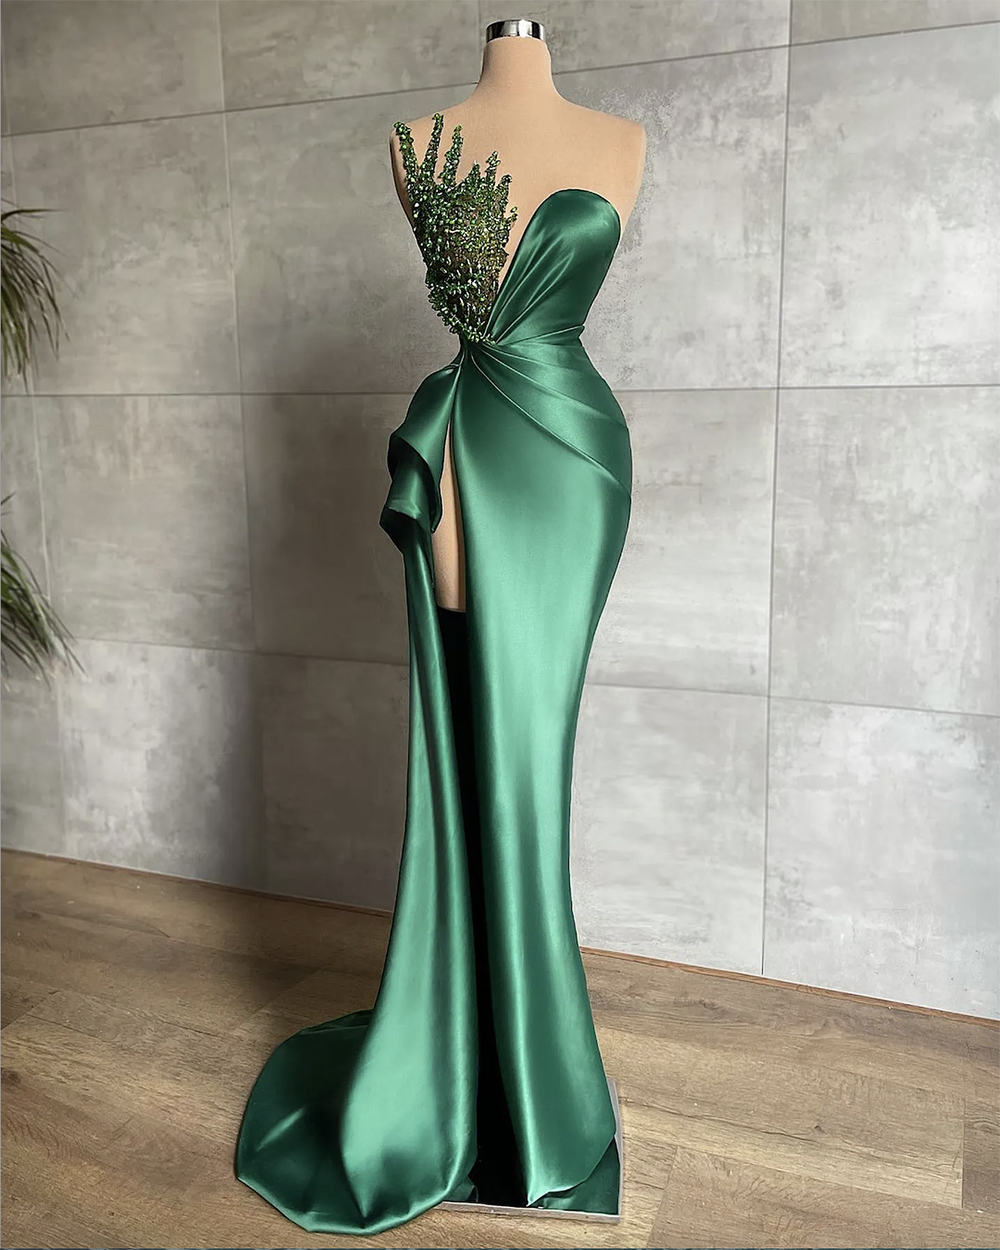 Green Mermaid Evening Dresses Beads Collar Party Prom Dress Pleats Split Formal Long Red Carpet Dress for special occasion